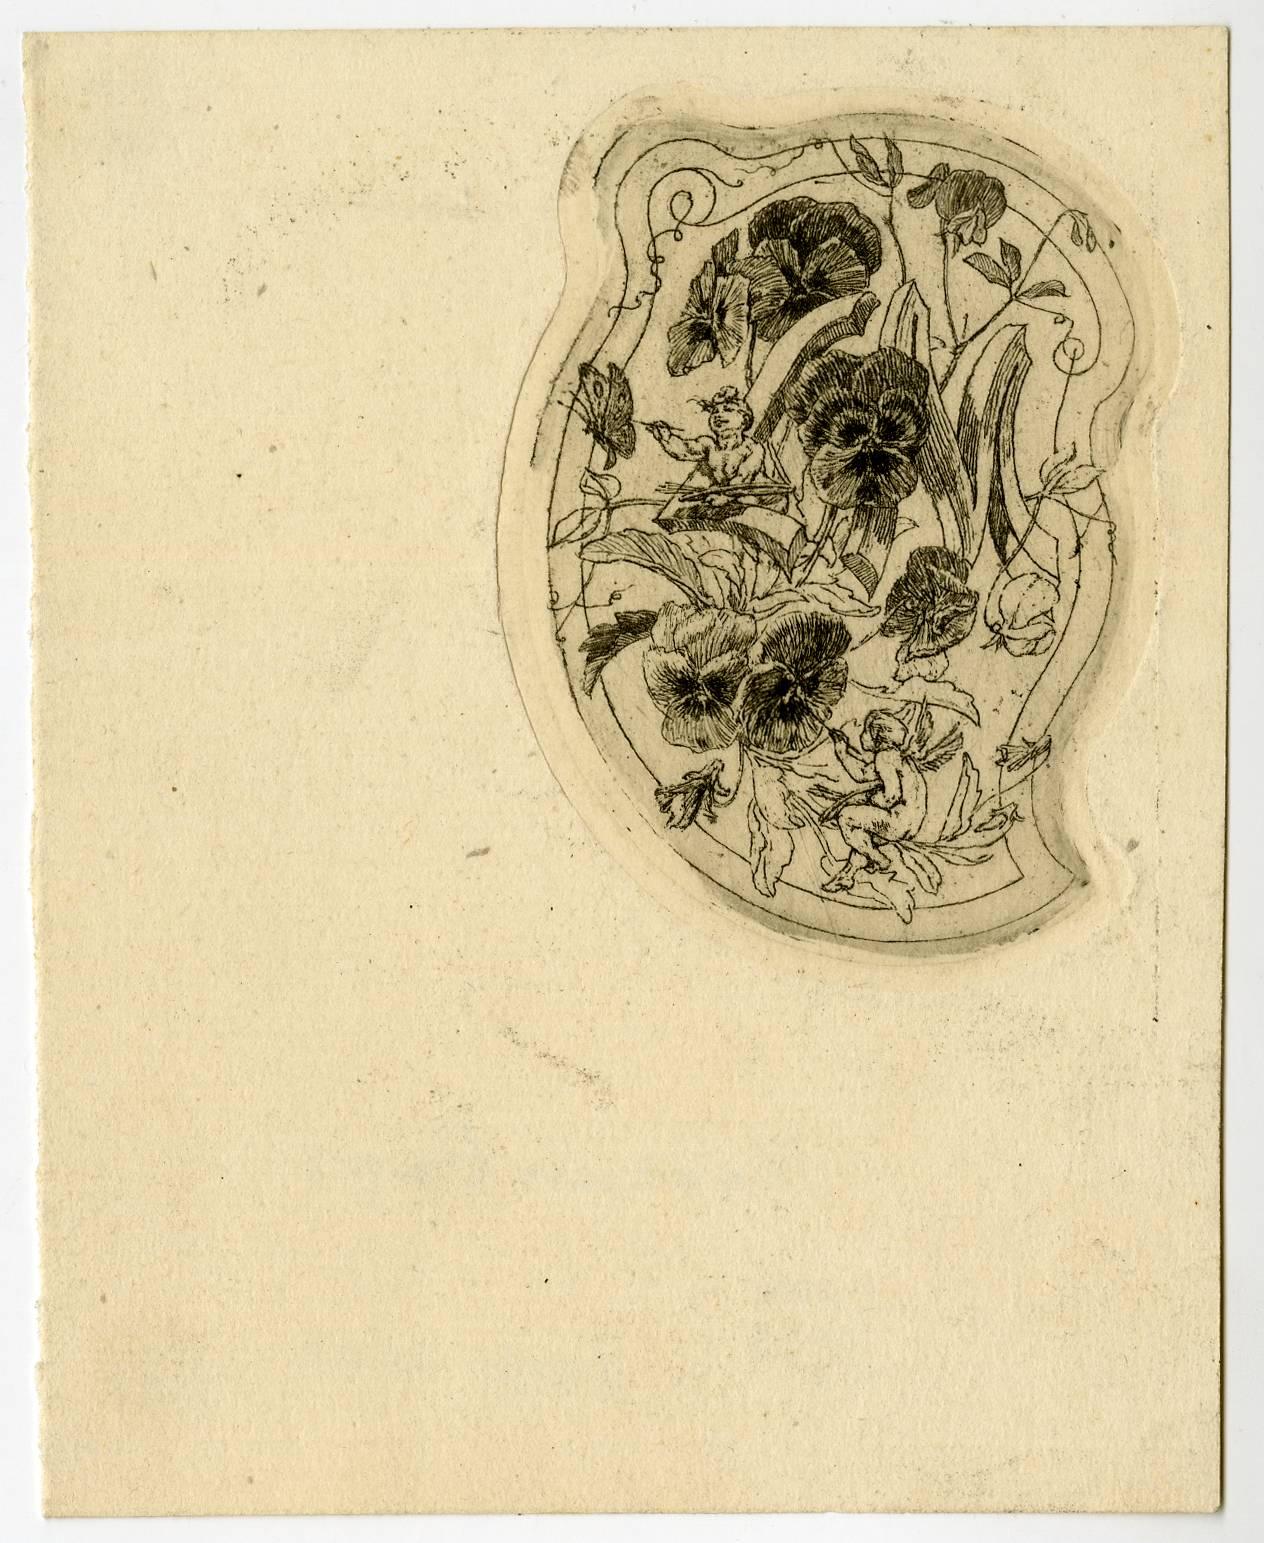 Félicien Rops Figurative Print - Untitled - Ornamental cartouche with the monogram LM; Les Pensees.